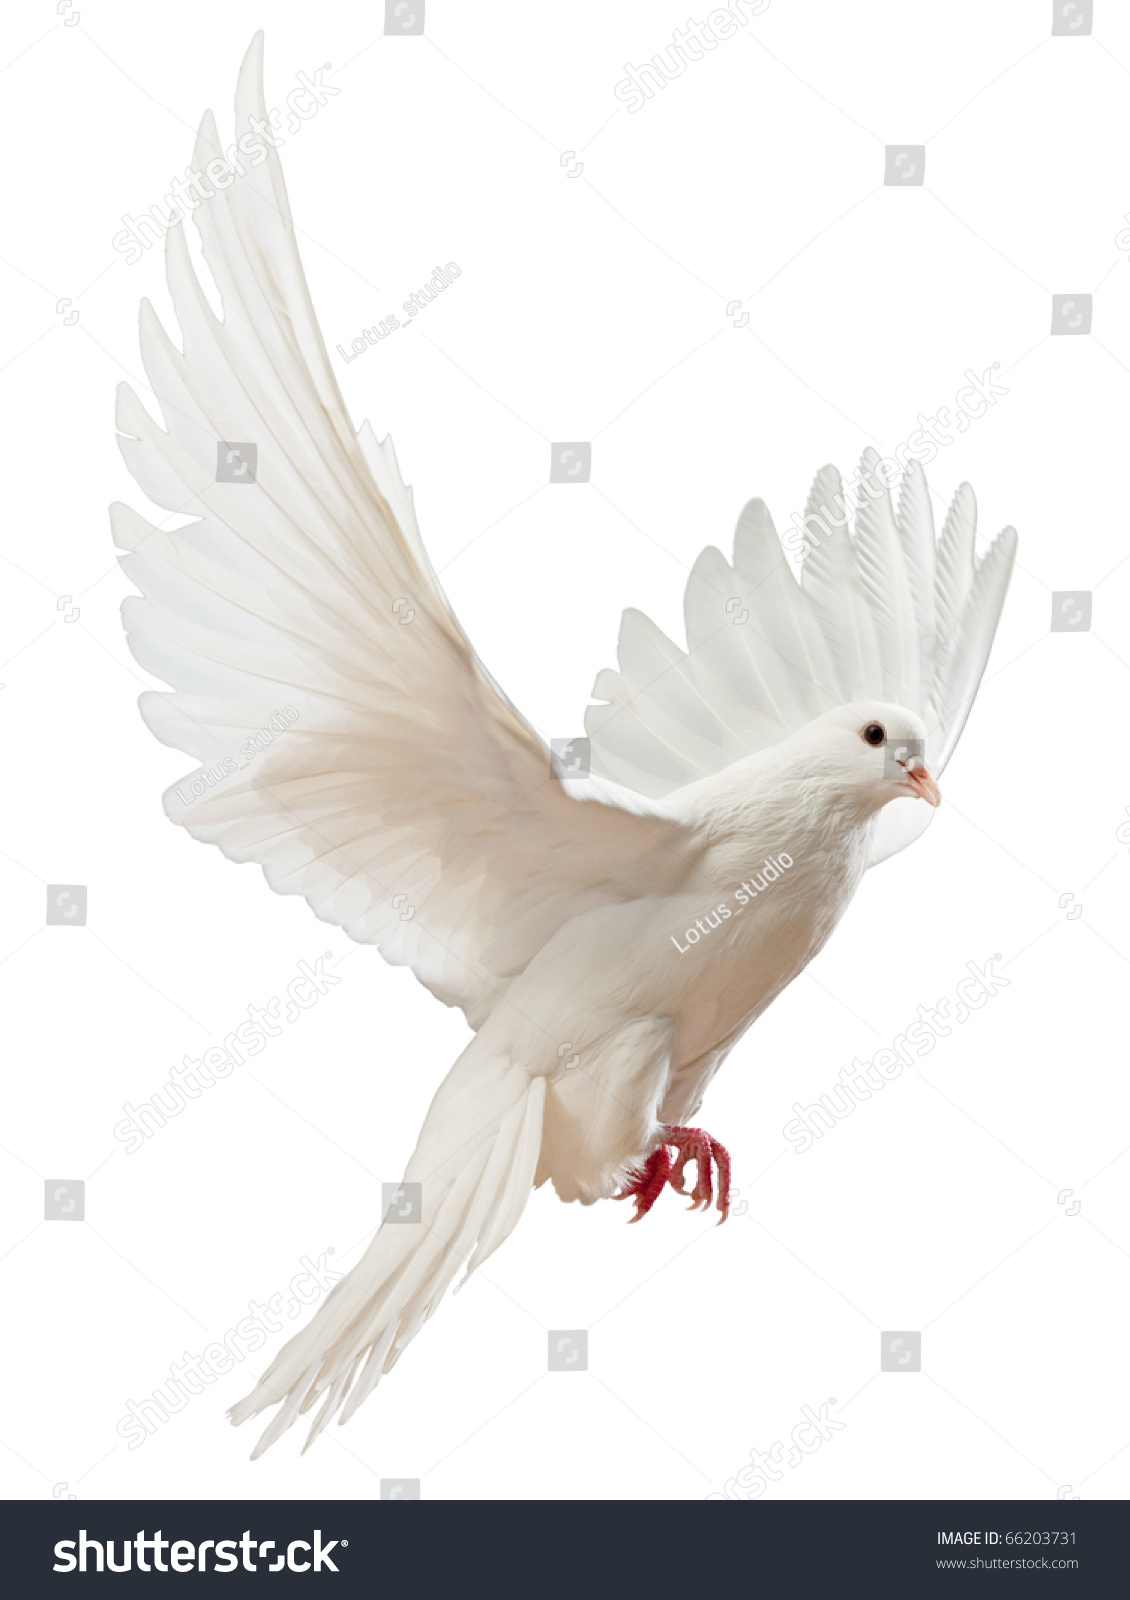 A free flying white dove isolated on a white background #66203731